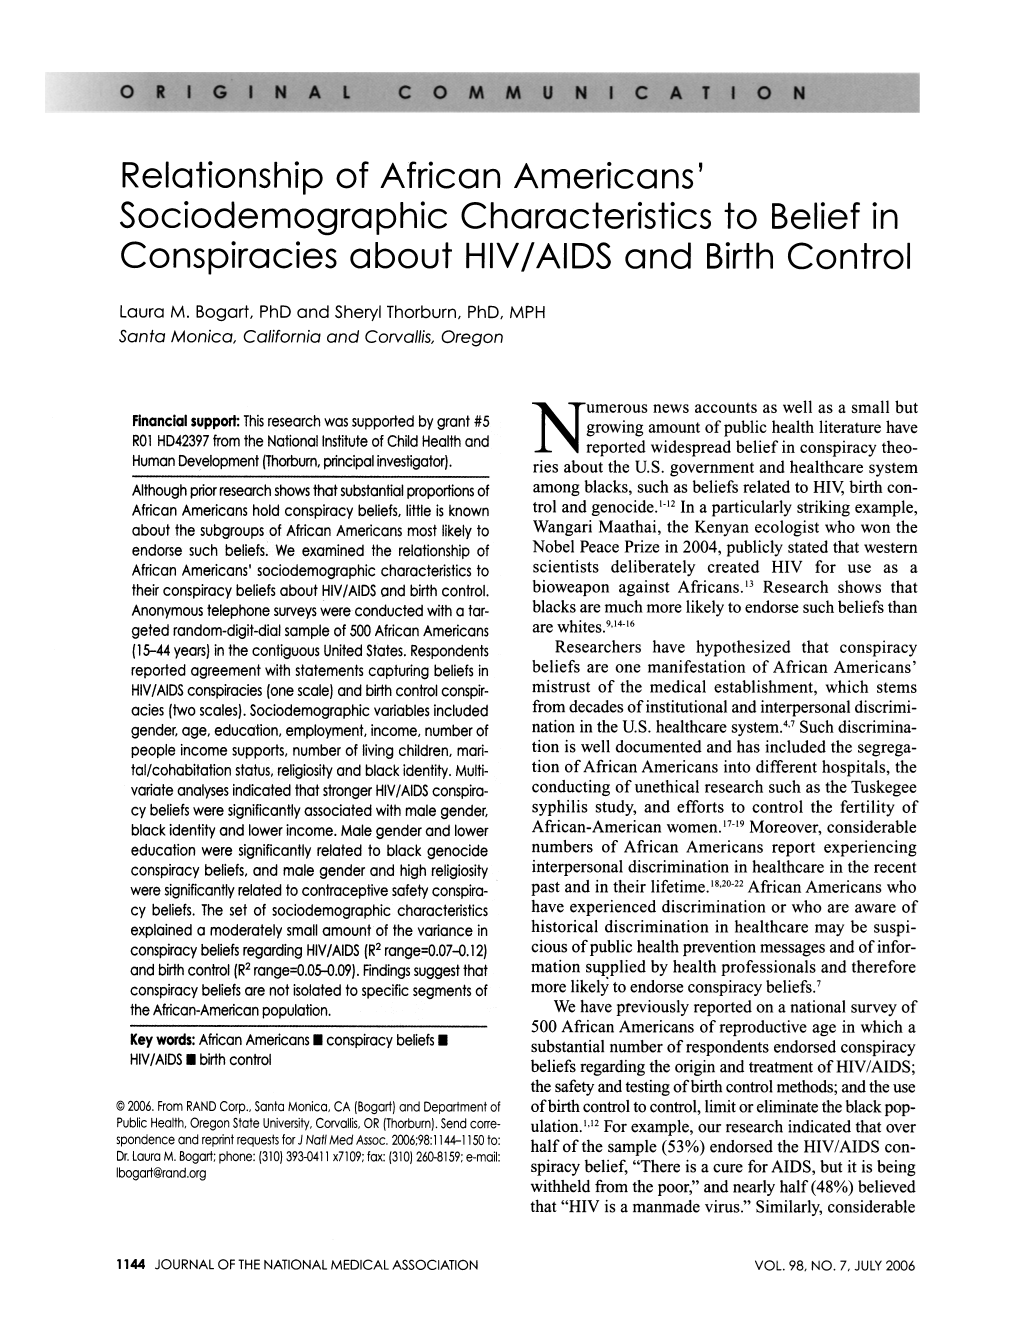 Relationship of African Americans' Sociodemographic Characteristics to Belief in Conspiracies About HIV/AIDS and Birth Control